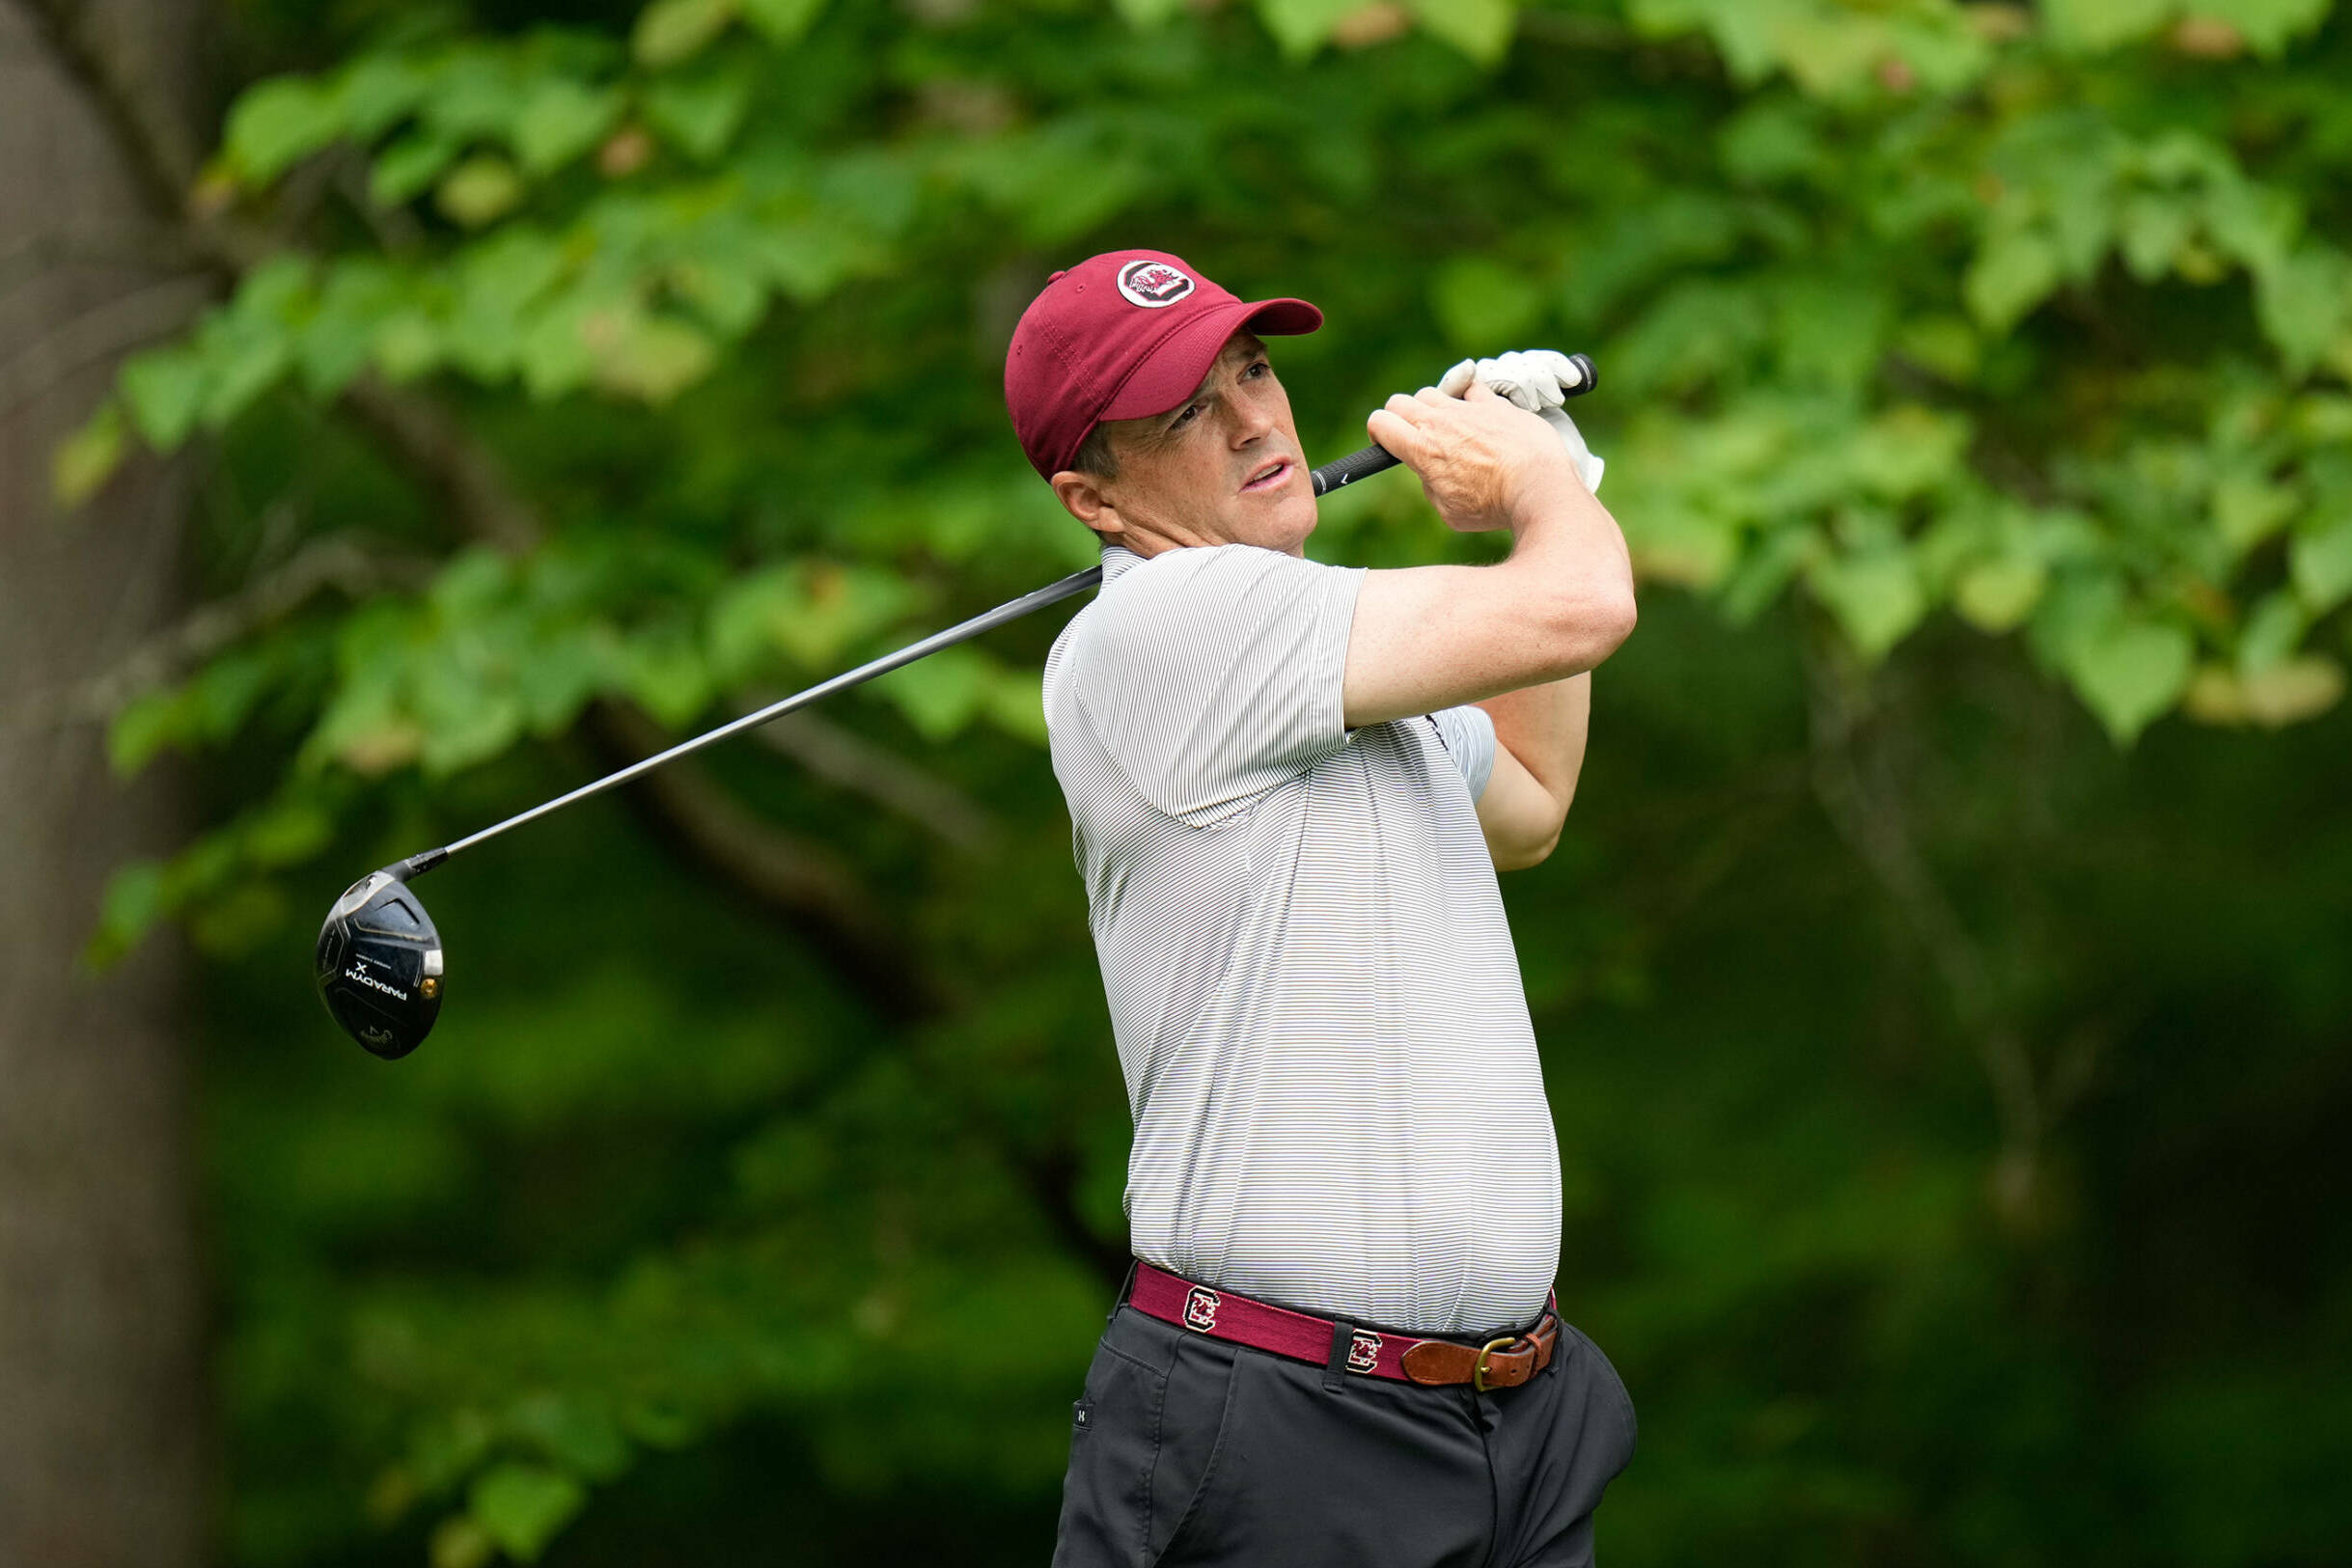 Beamer and Nutt Place Second at Peach Bowl Challenge